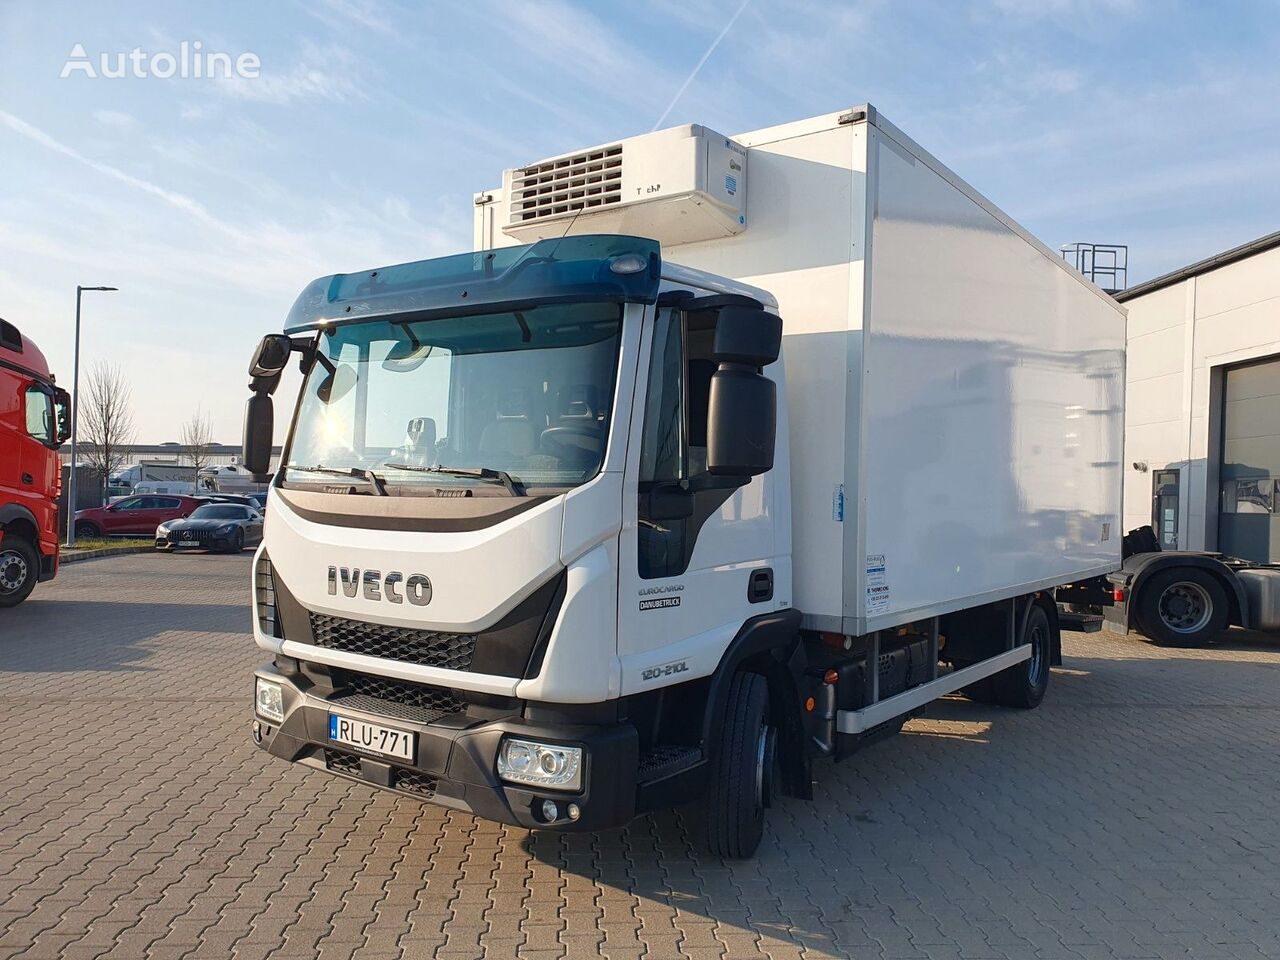 IVECO 120 E 210 ThermoKing V-600 +Tail lift Max refrigerated truck